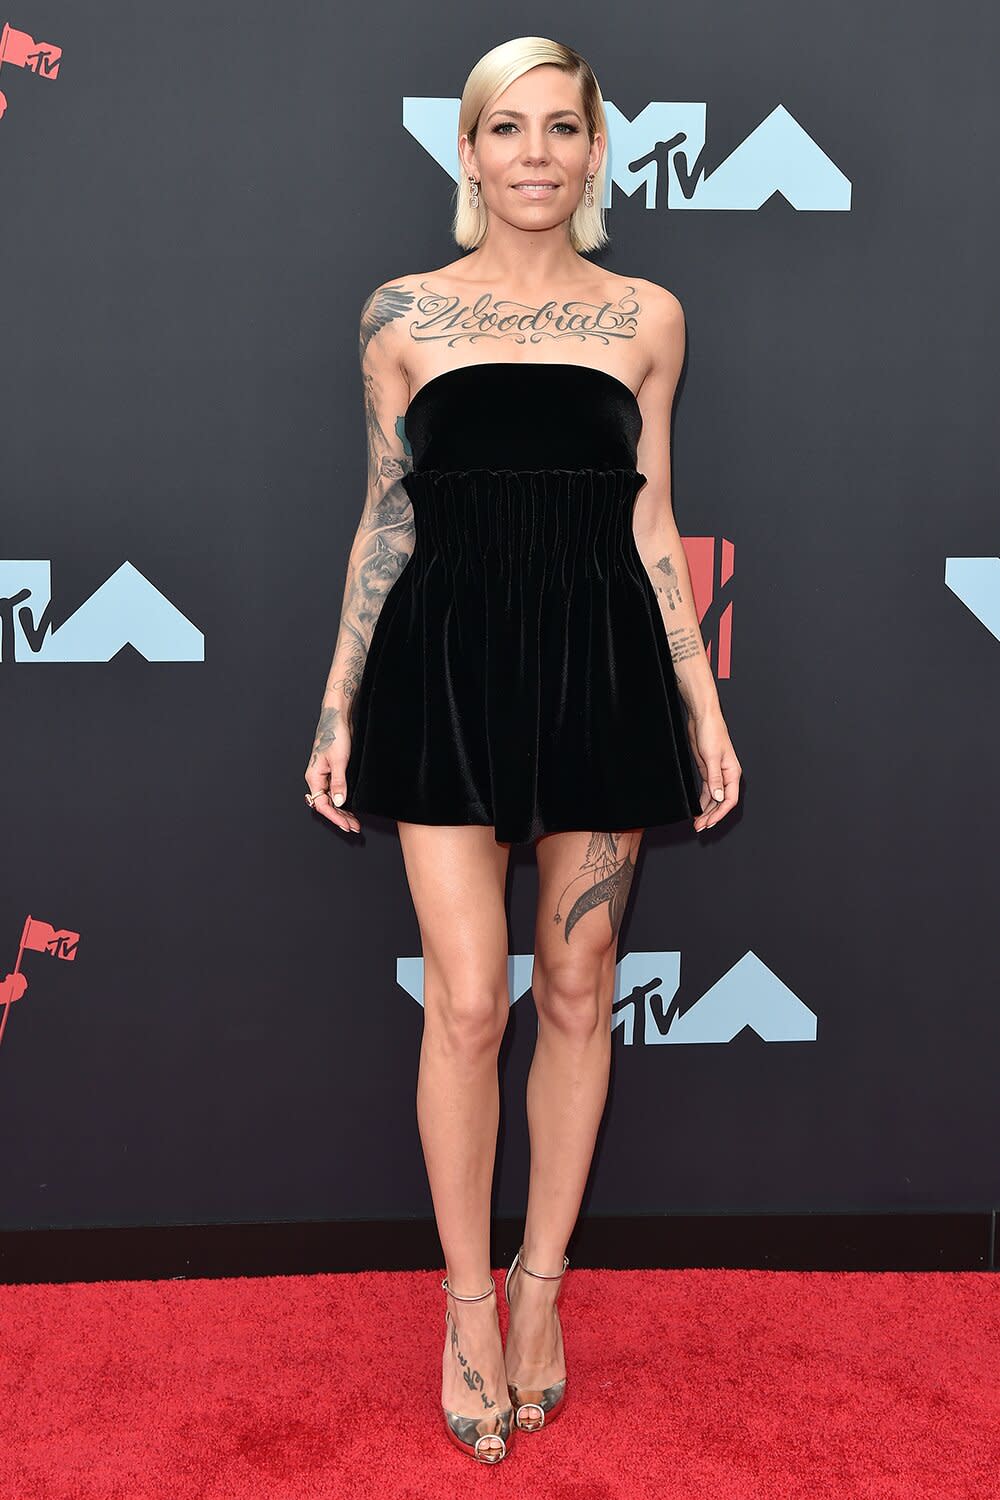 Skylar Grey attends the 2019 MTV Video Music Awards at Prudential Center on August 26, 2019 in Newark, New Jersey.